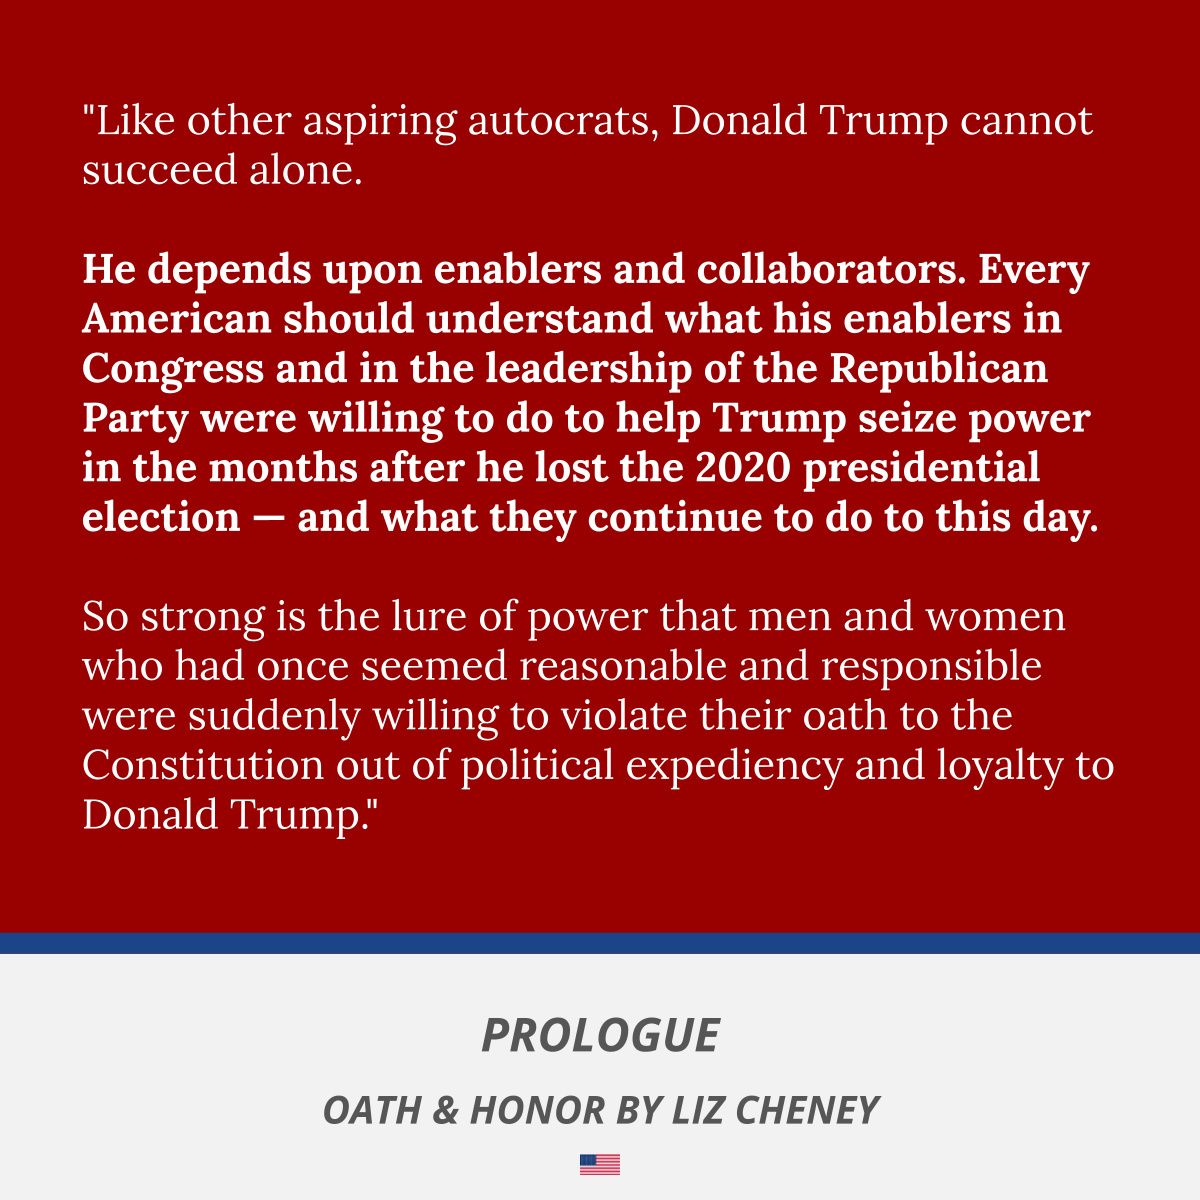 "Like other aspiring autocrats, Donald Trump cannot succeed alone.   He depends upon enablers and collaborators. Every American should understand what his enablers in Congress and in the leadership of the Republican Party were willing to do to help Trump seize power in the months after he lost the 2020 presidential election — and what they continue to do to this day.   So strong is the lure of power that men and women who had once seemed reasonable and responsible were suddenly willing to violate their oath to the Constitution out of political expediency and loyalty to Donald Trump."